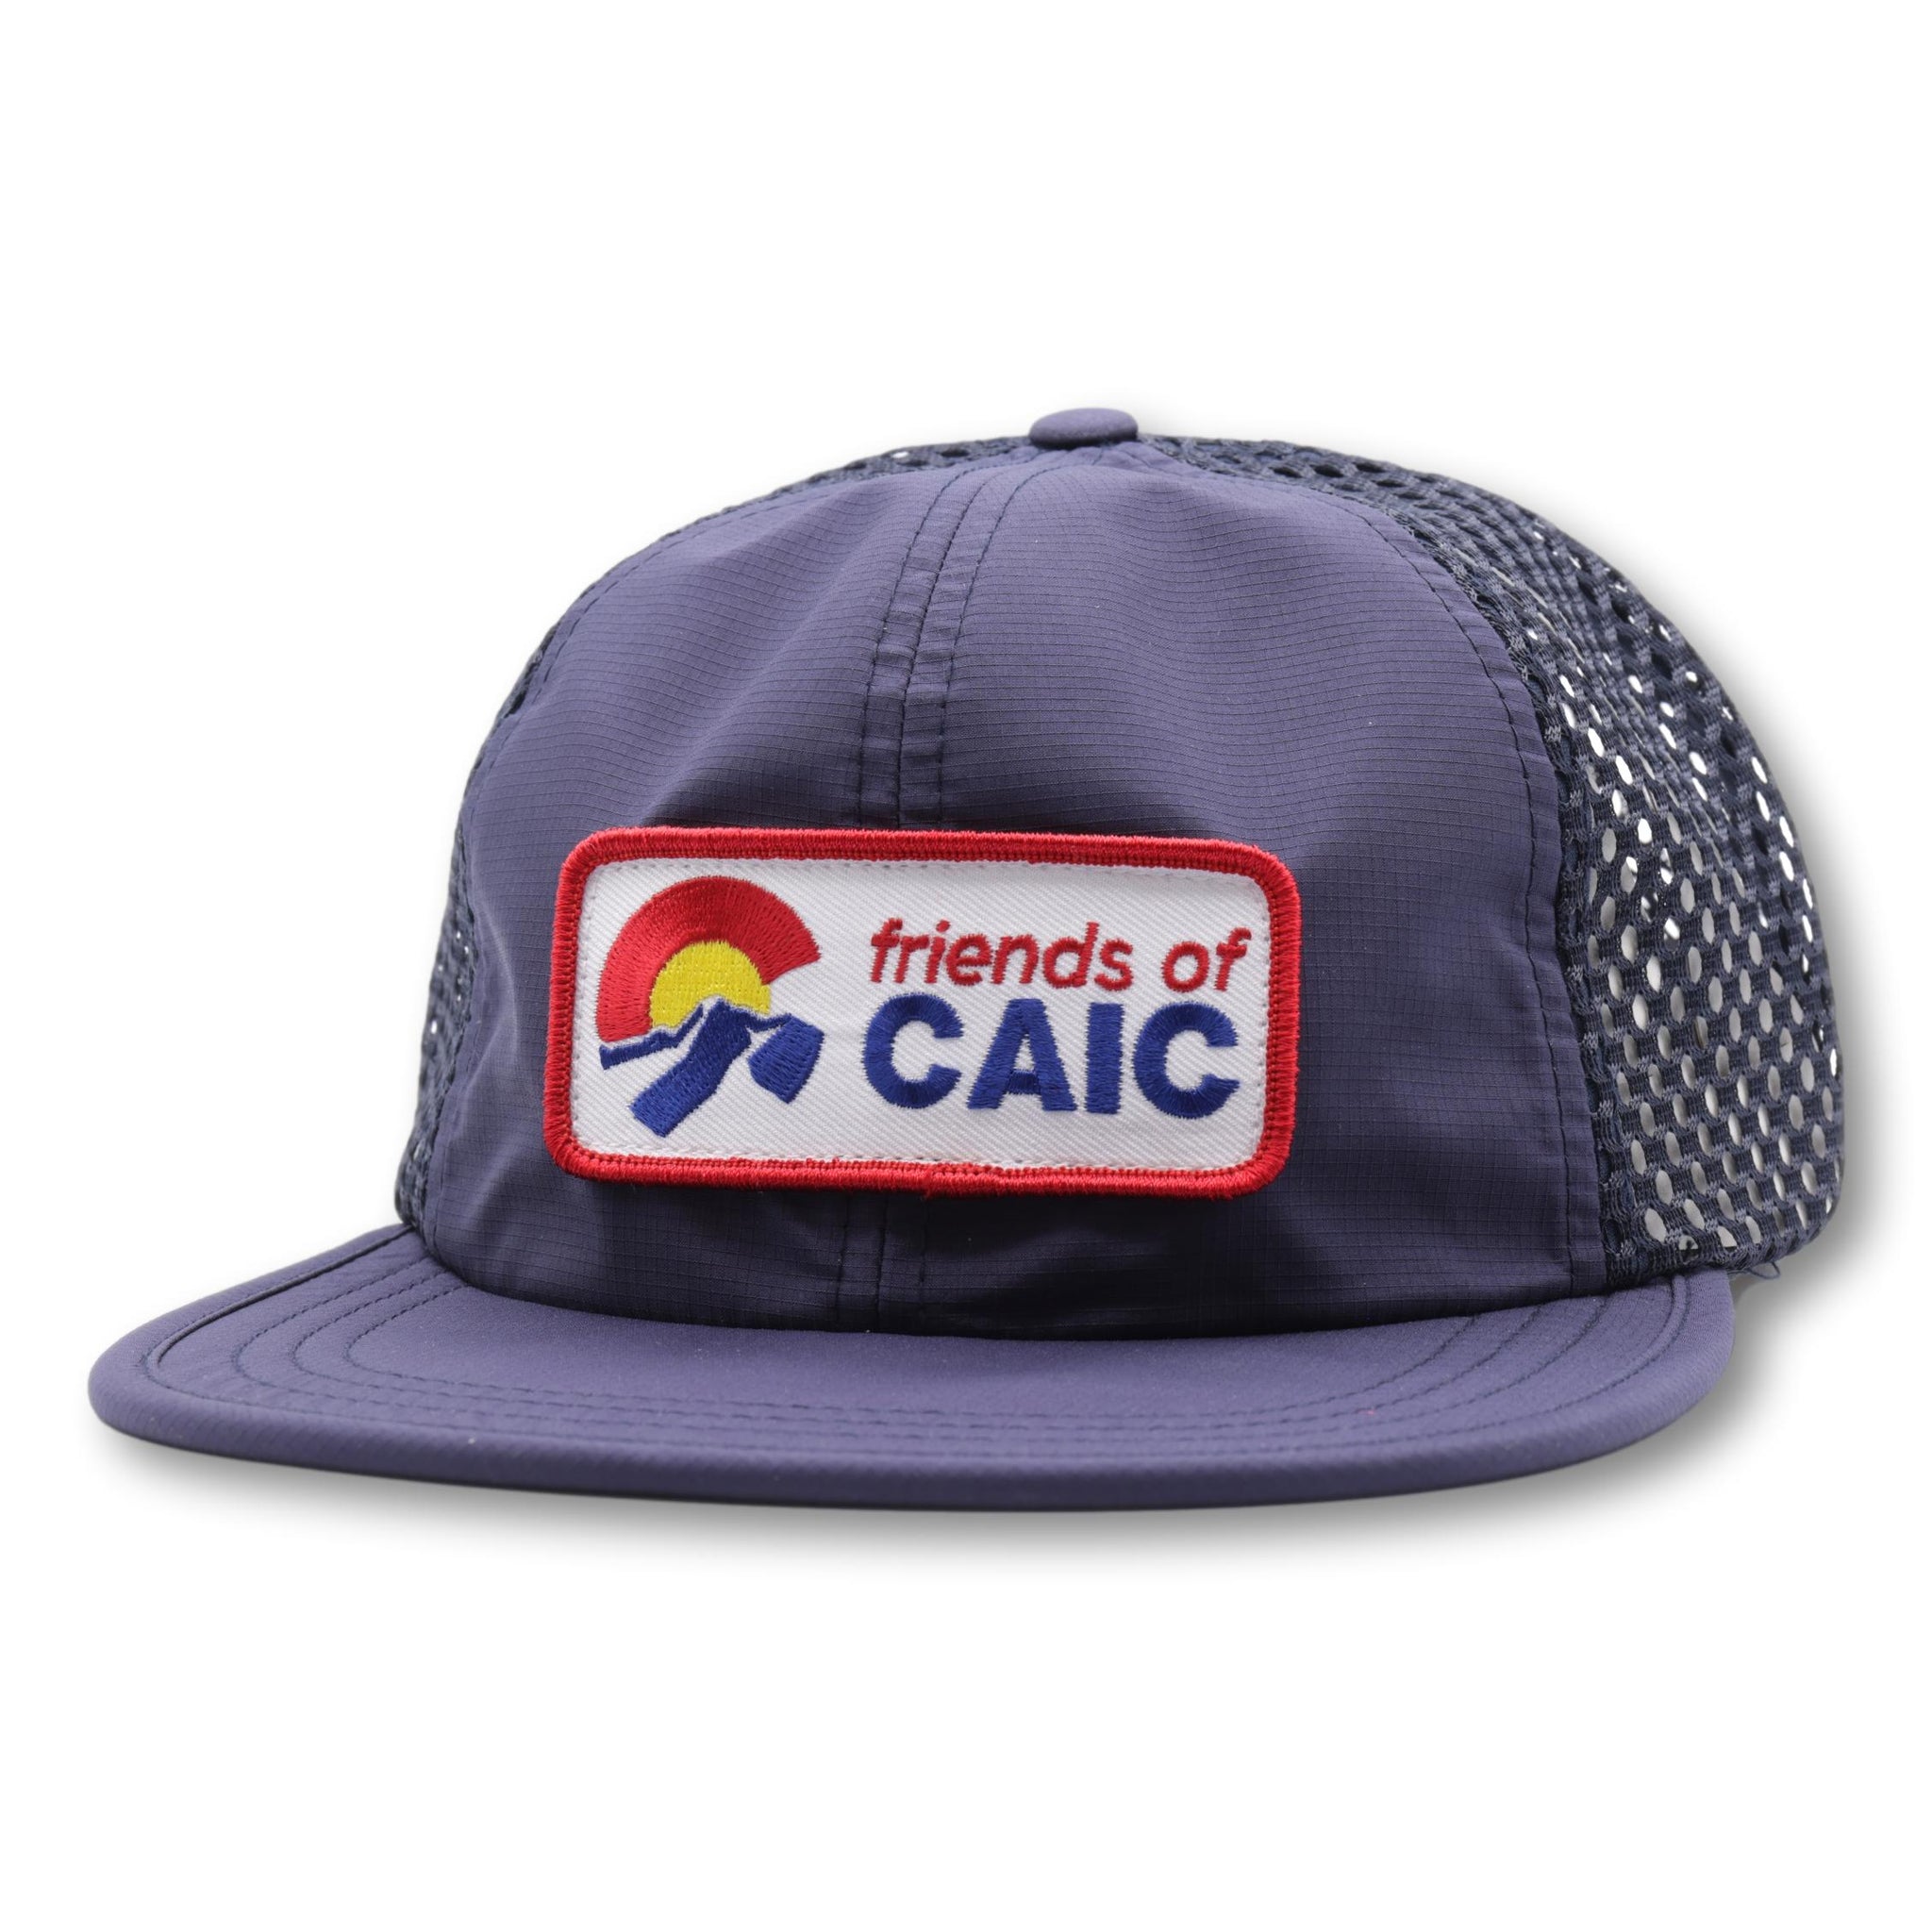 Cotton Boonie Hat with Turtle Tape Band - DPC Outdoor Hats Navy / Medium (57 cm)